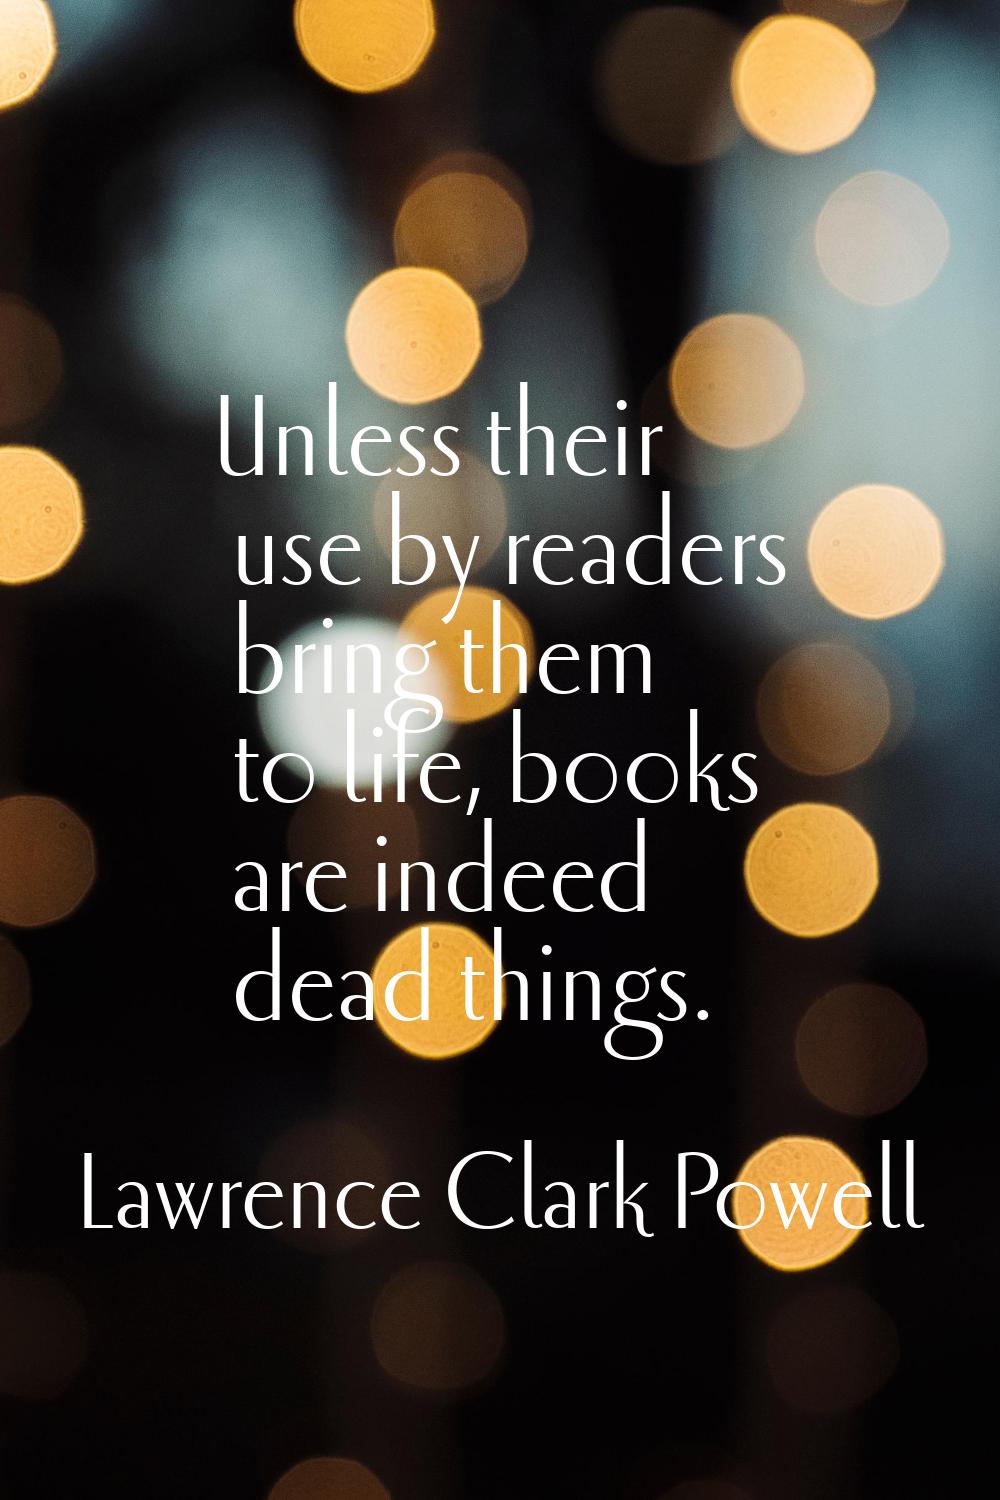 Unless their use by readers bring them to life, books are indeed dead things.